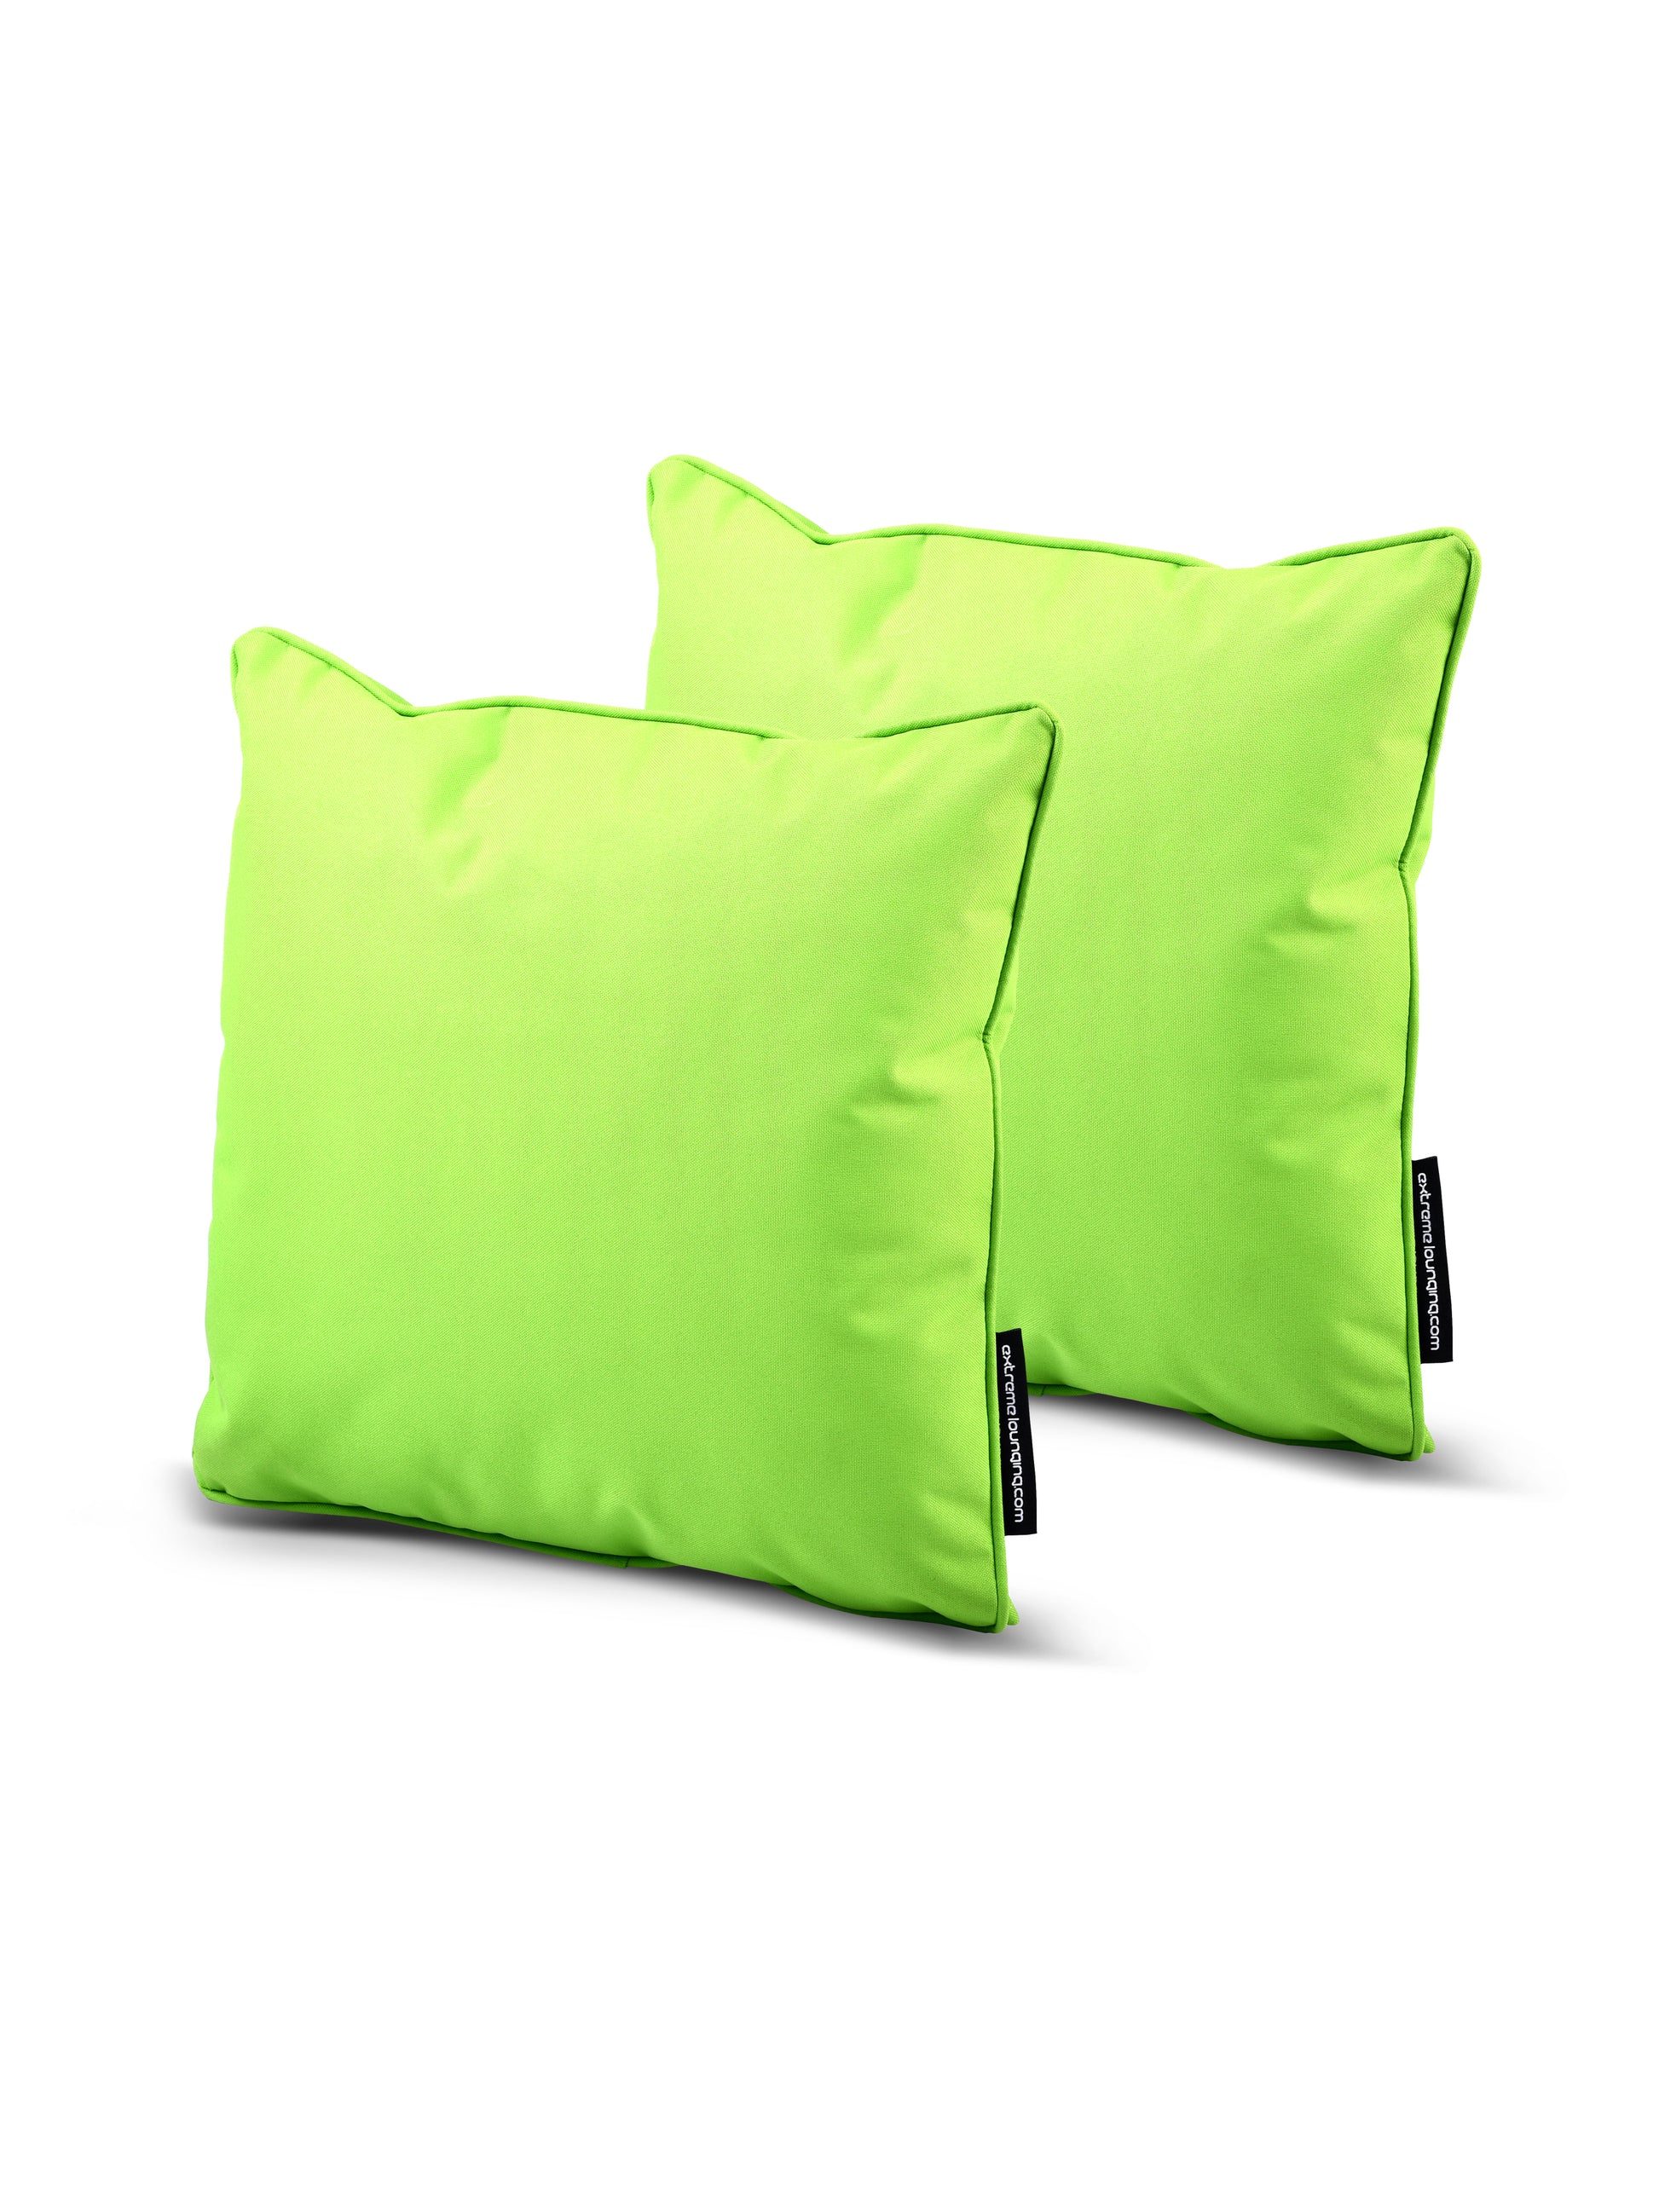 Two vibrant green rectangular pillows are shown against a white background. Each pillow, made from breathable polyester, has a small black tag with white text on one of its edges. The splash-proof cushions, part of the *B Cushion Twin Pack Brights Collection* by *Brisks*, have a smooth surface and slightly rounded corners.